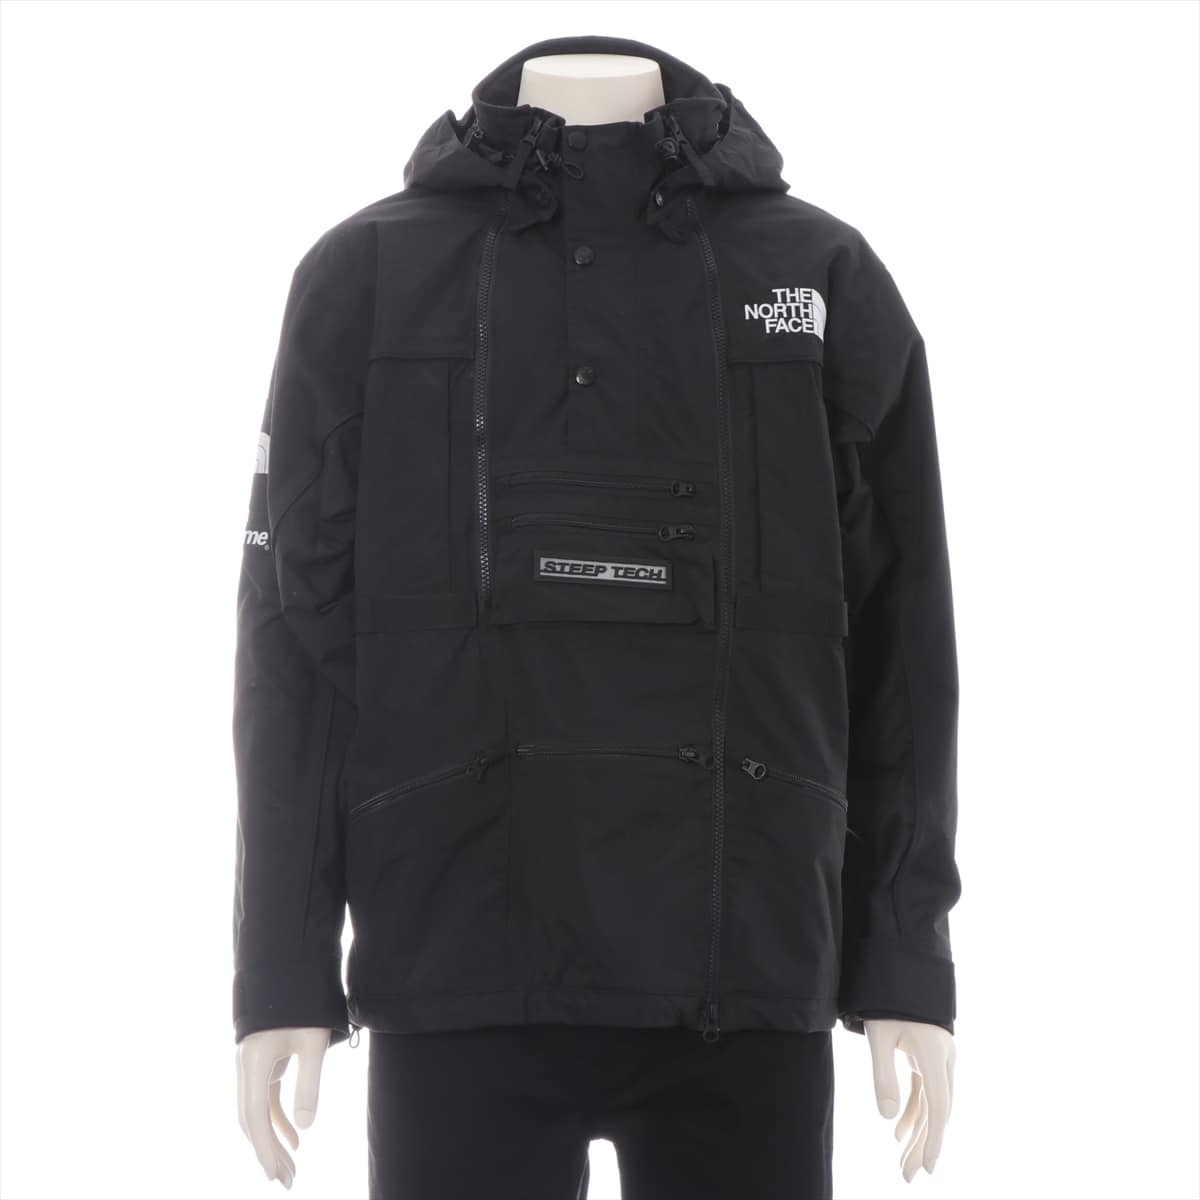 SUPREME × THE NORTH FACE Nylon Mountain hoodie S Men's Black 16SS STEEP TECH JACKET NF0A2RES